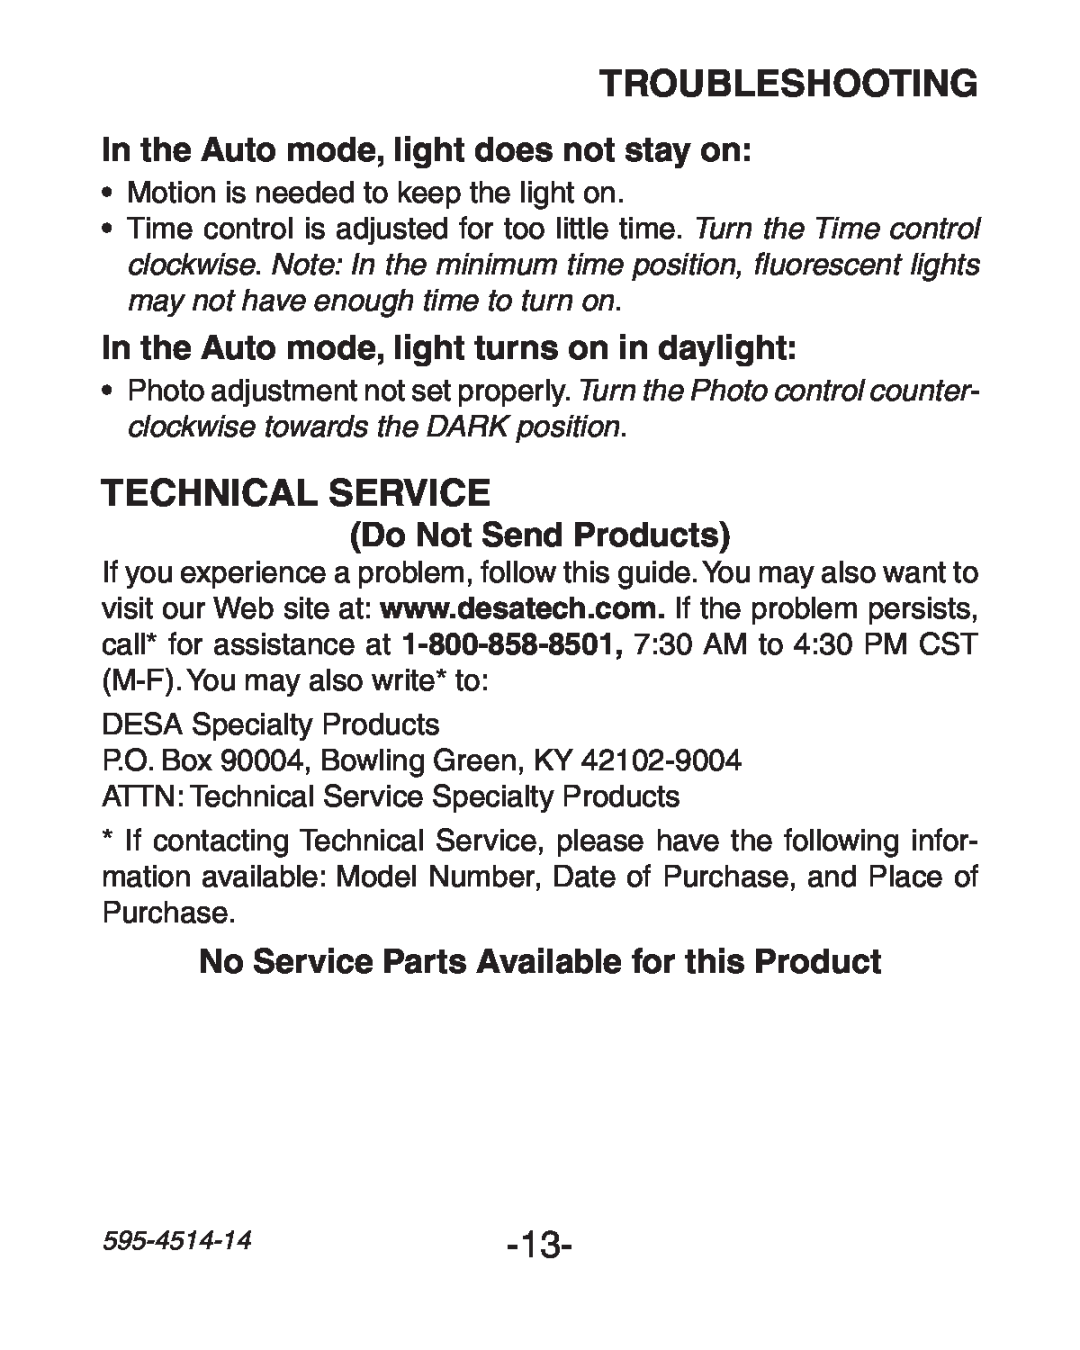 Heath Zenith SL-6107 Technical Service, In the Auto mode, light does not stay on, Do Not Send Products, Troubleshooting 